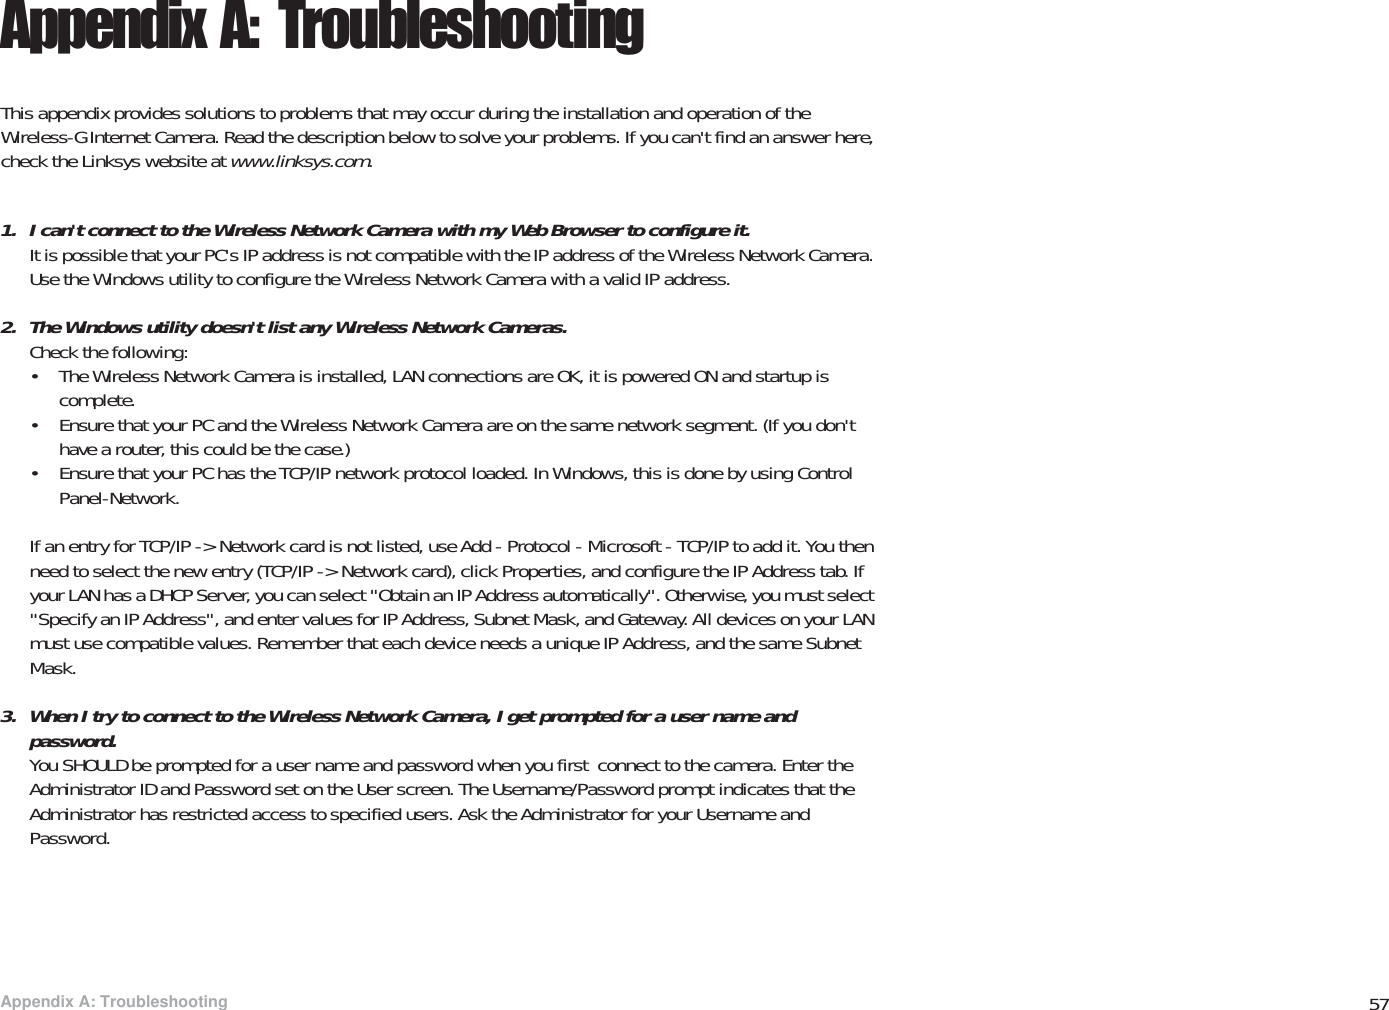 57Appendix A: TroubleshootingWireless-G PTZ Internet Video Camera with AudioAppendix A: TroubleshootingThis appendix provides solutions to problems that may occur during the installation and operation of the Wireless-G Internet Camera. Read the description below to solve your problems. If you can&apos;t find an answer here, check the Linksys website at www.linksys.com.1. I can&apos;t connect to the Wireless Network Camera with my Web Browser to configure it.It is possible that your PC&apos;s IP address is not compatible with the IP address of the Wireless Network Camera. Use the Windows utility to configure the Wireless Network Camera with a valid IP address.2. The Windows utility doesn&apos;t list any Wireless Network Cameras.Check the following:• The Wireless Network Camera is installed, LAN connections are OK, it is powered ON and startup is complete.• Ensure that your PC and the Wireless Network Camera are on the same network segment. (If you don&apos;t have a router, this could be the case.) • Ensure that your PC has the TCP/IP network protocol loaded. In Windows, this is done by using Control Panel-Network. If an entry for TCP/IP -&gt; Network card is not listed, use Add - Protocol - Microsoft - TCP/IP to add it. You then need to select the new entry (TCP/IP -&gt; Network card), click Properties, and configure the IP Address tab. If your LAN has a DHCP Server, you can select &quot;Obtain an IP Address automatically&quot;. Otherwise, you must select &quot;Specify an IP Address&quot;, and enter values for IP Address, Subnet Mask, and Gateway. All devices on your LAN must use compatible values. Remember that each device needs a unique IP Address, and the same Subnet Mask.3. When I try to connect to the Wireless Network Camera, I get prompted for a user name and password.You SHOULD be prompted for a user name and password when you first  connect to the camera. Enter the Administrator ID and Password set on the User screen. The Username/Password prompt indicates that the Administrator has restricted access to specified users. Ask the Administrator for your Username and Password.